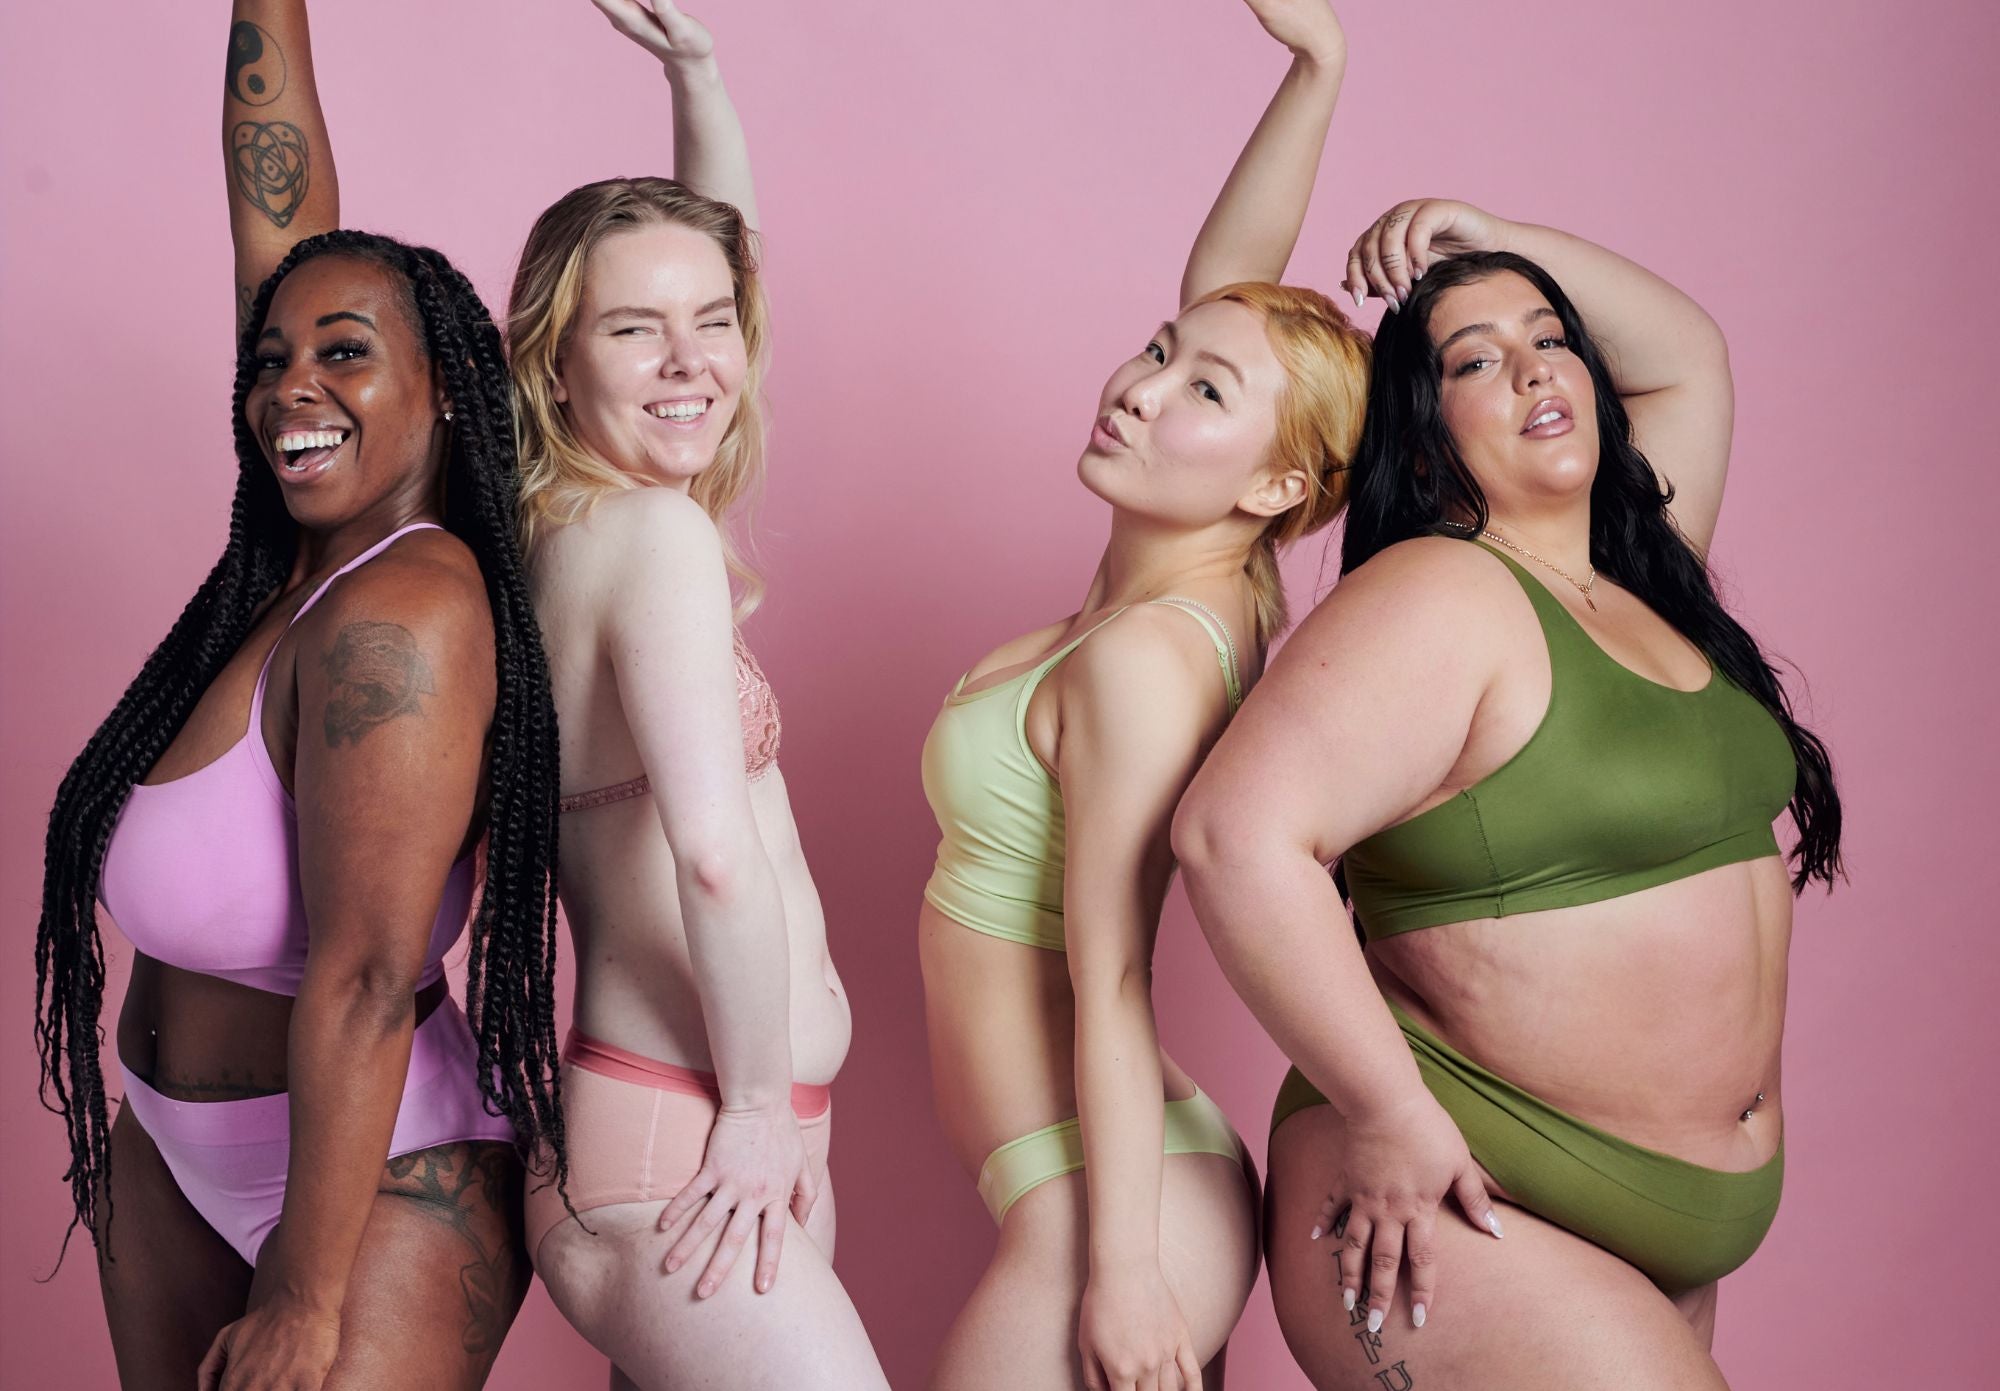 Breaking the Mold: Embracing Diversity & Body Positivity